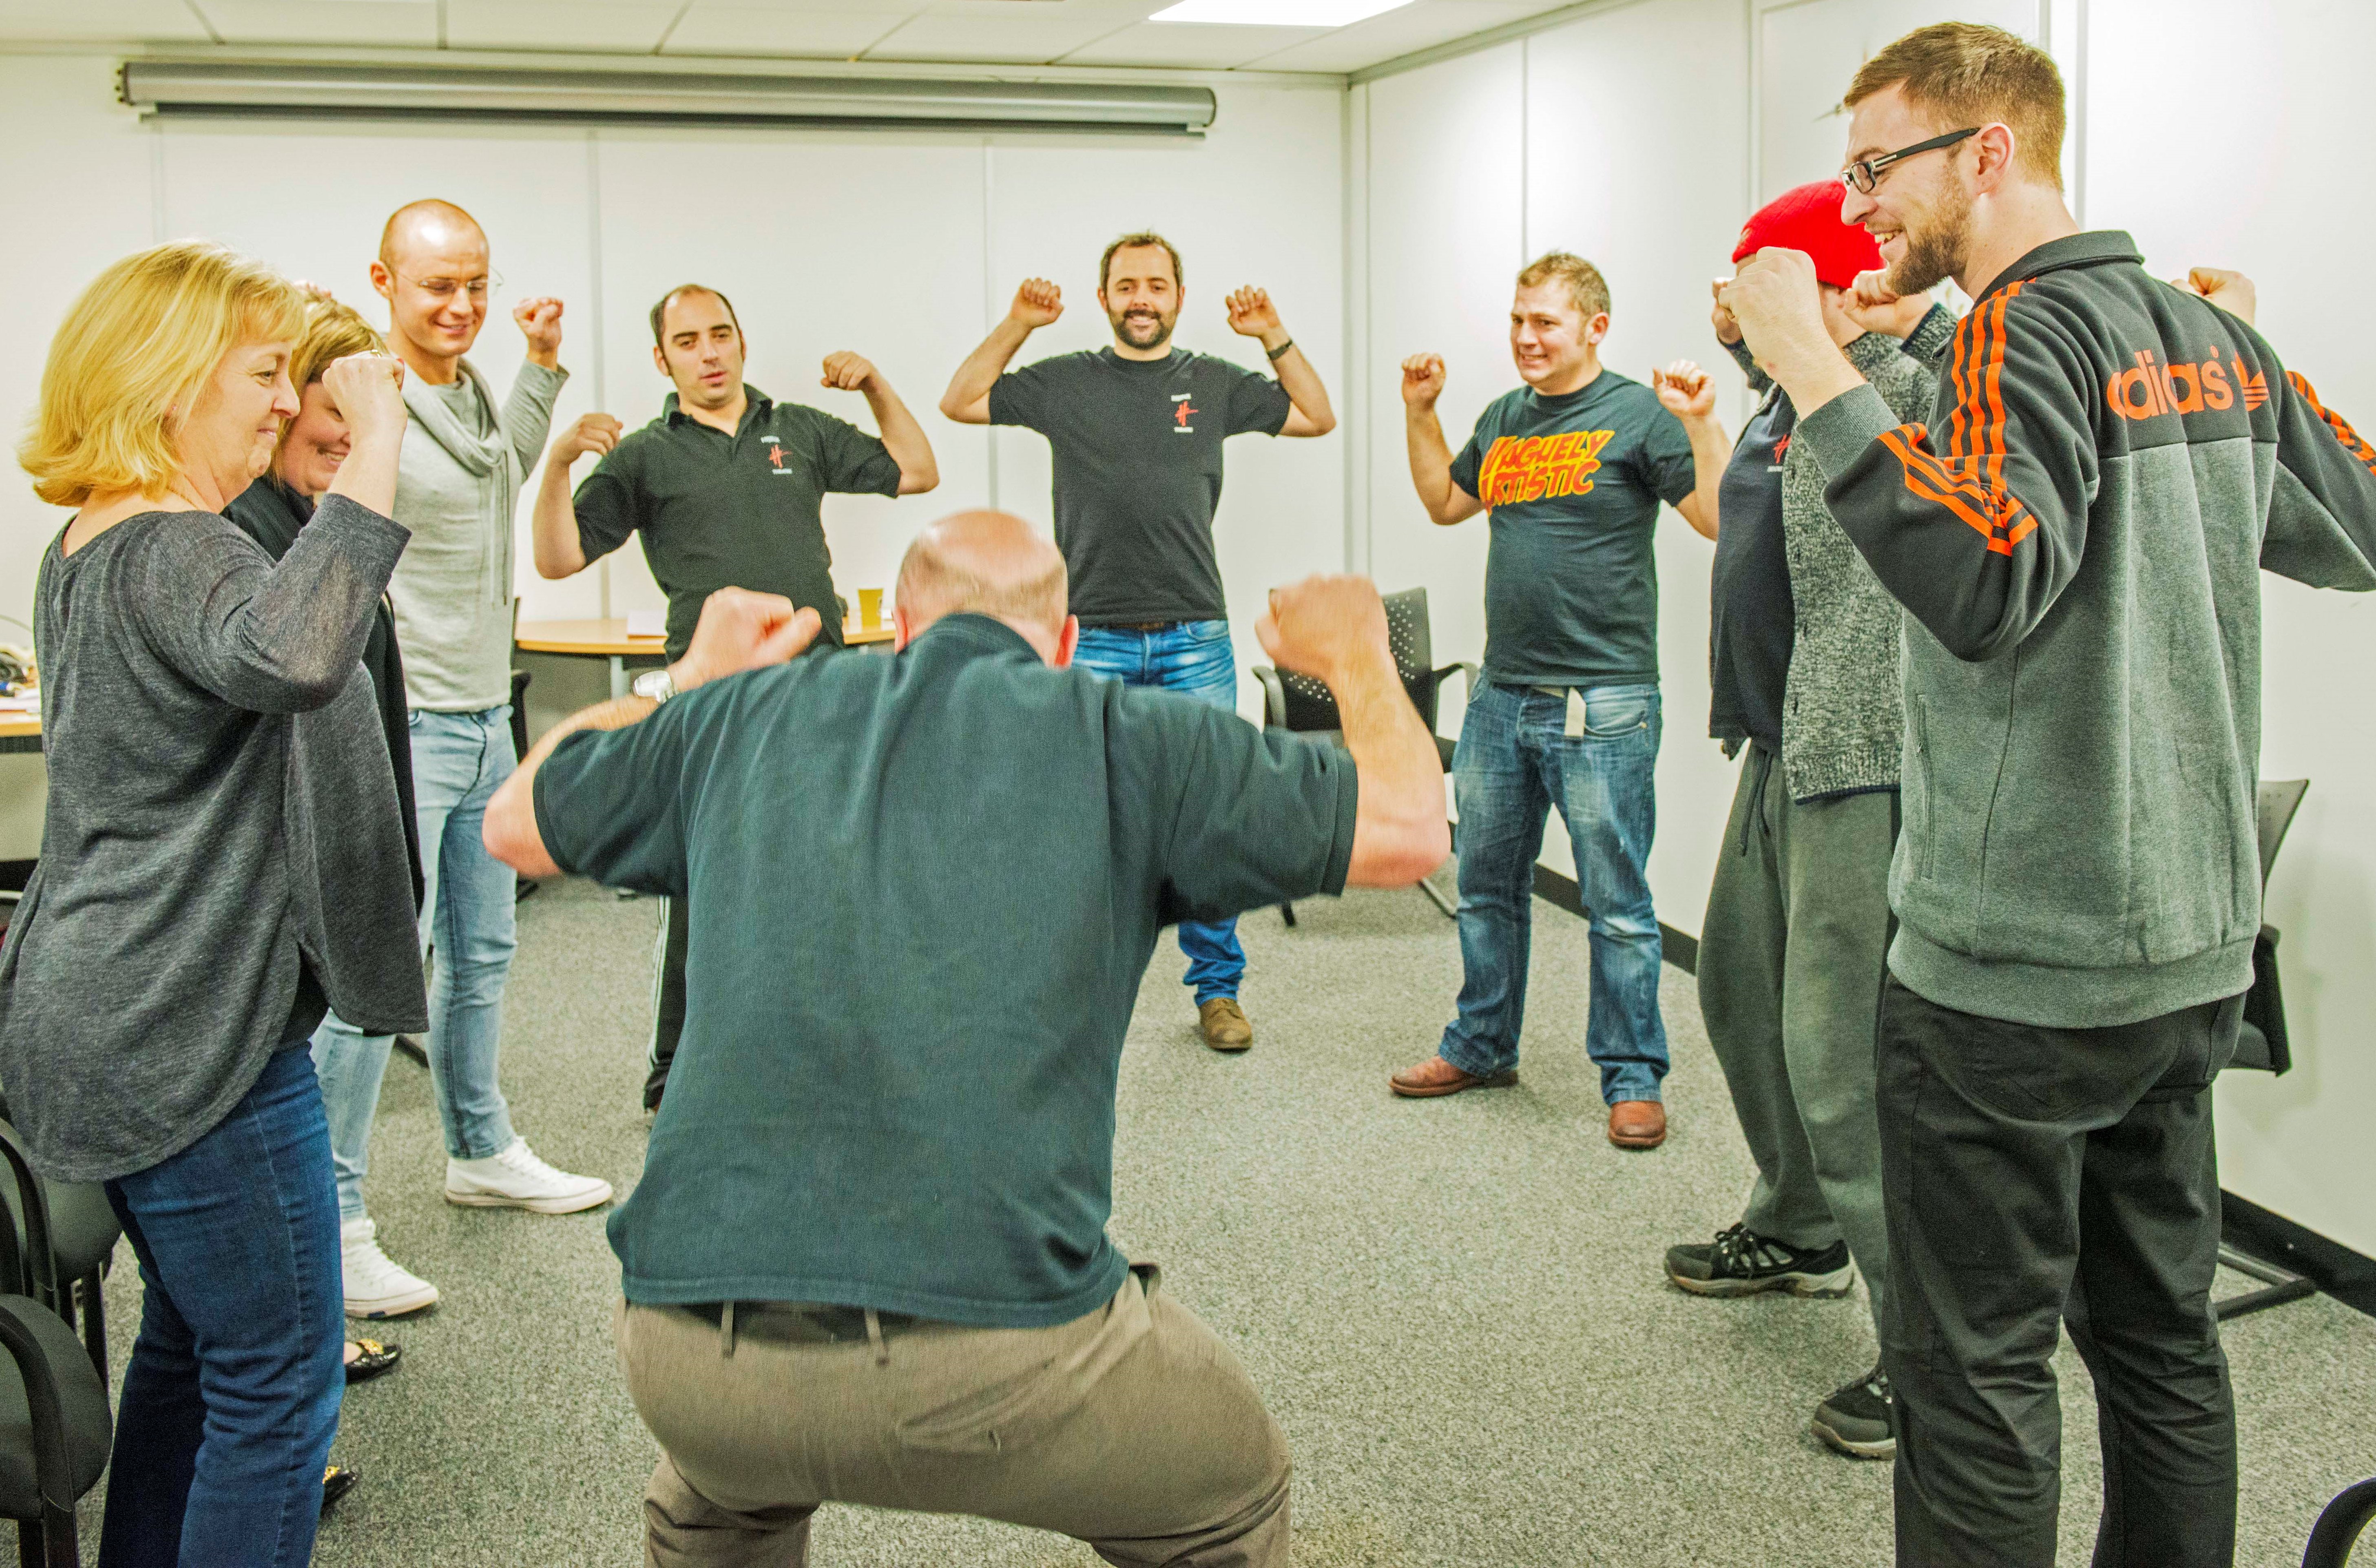 Nine people stand in a circle with arms raised and fists balled, taking part in an arts-based training activity with Hijinx Theatre